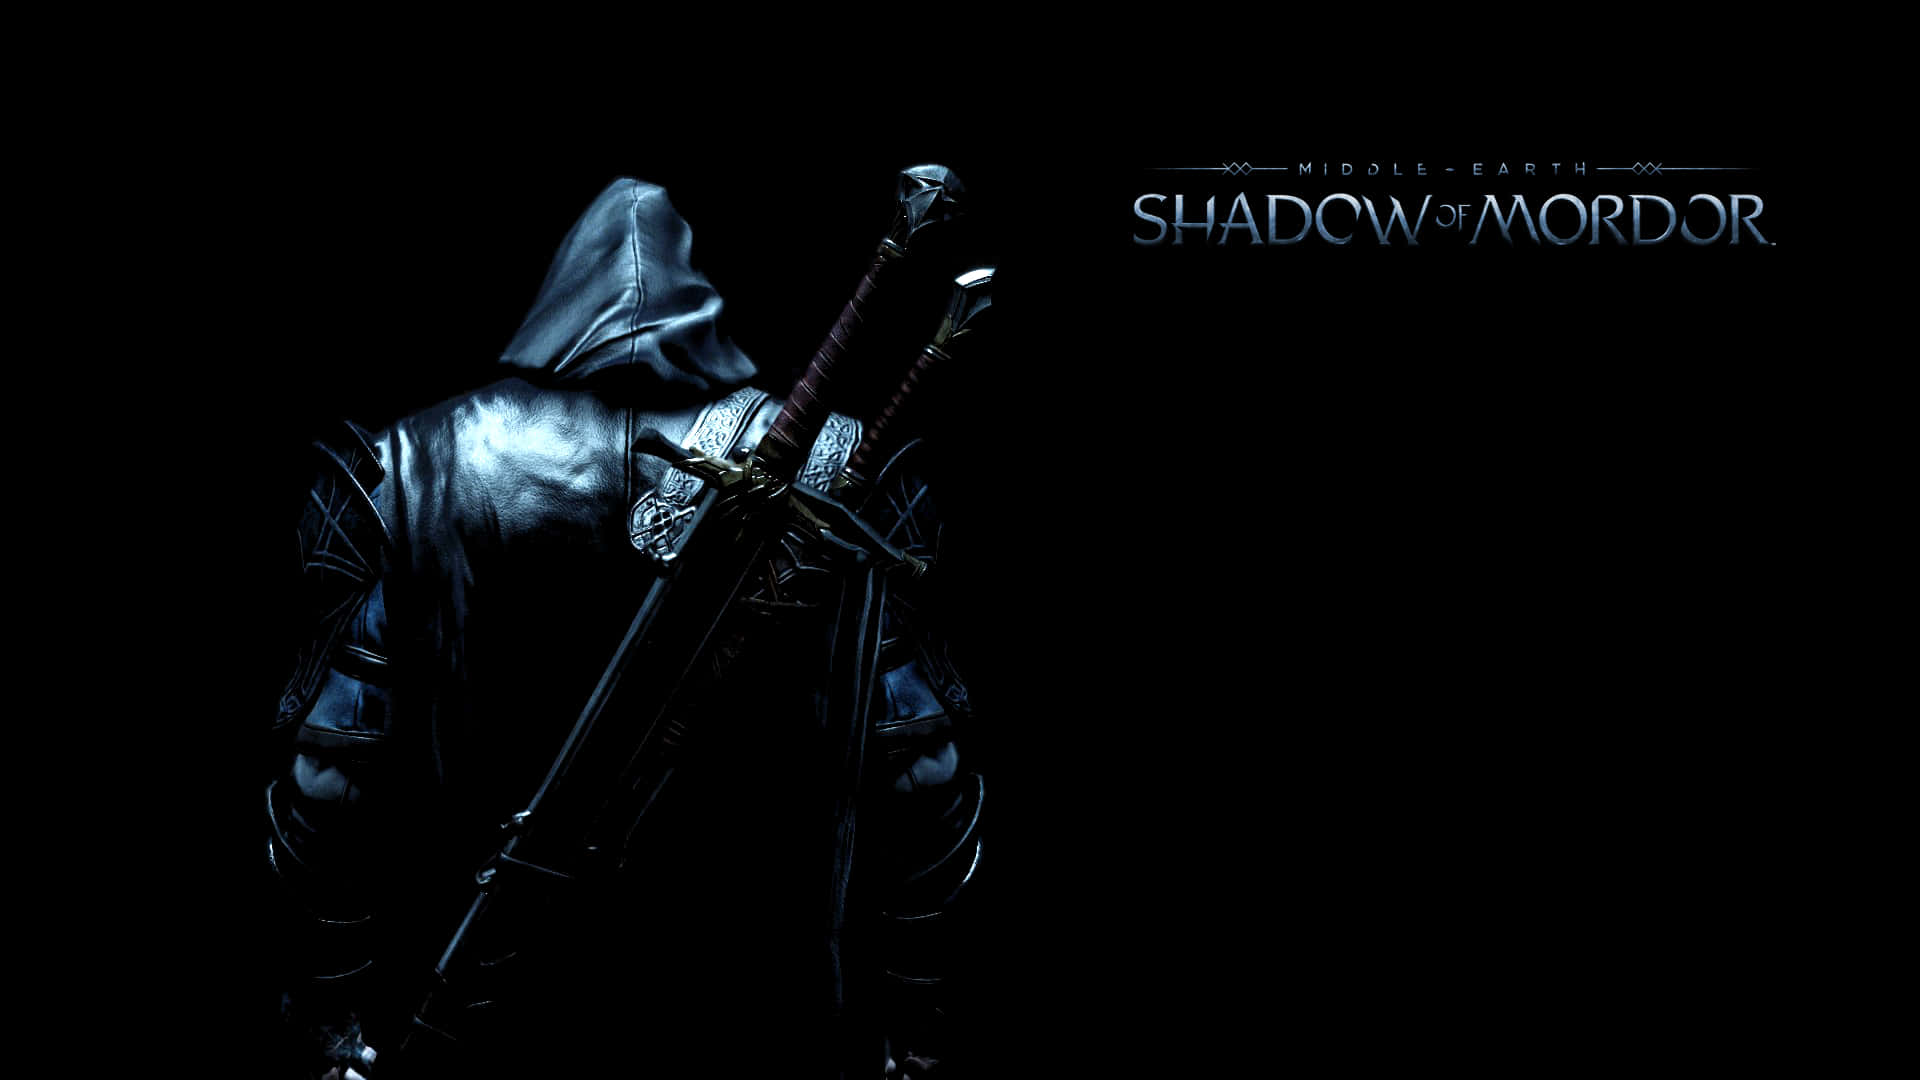 Uncover the secrets of Mordor in Shadow of Mordor